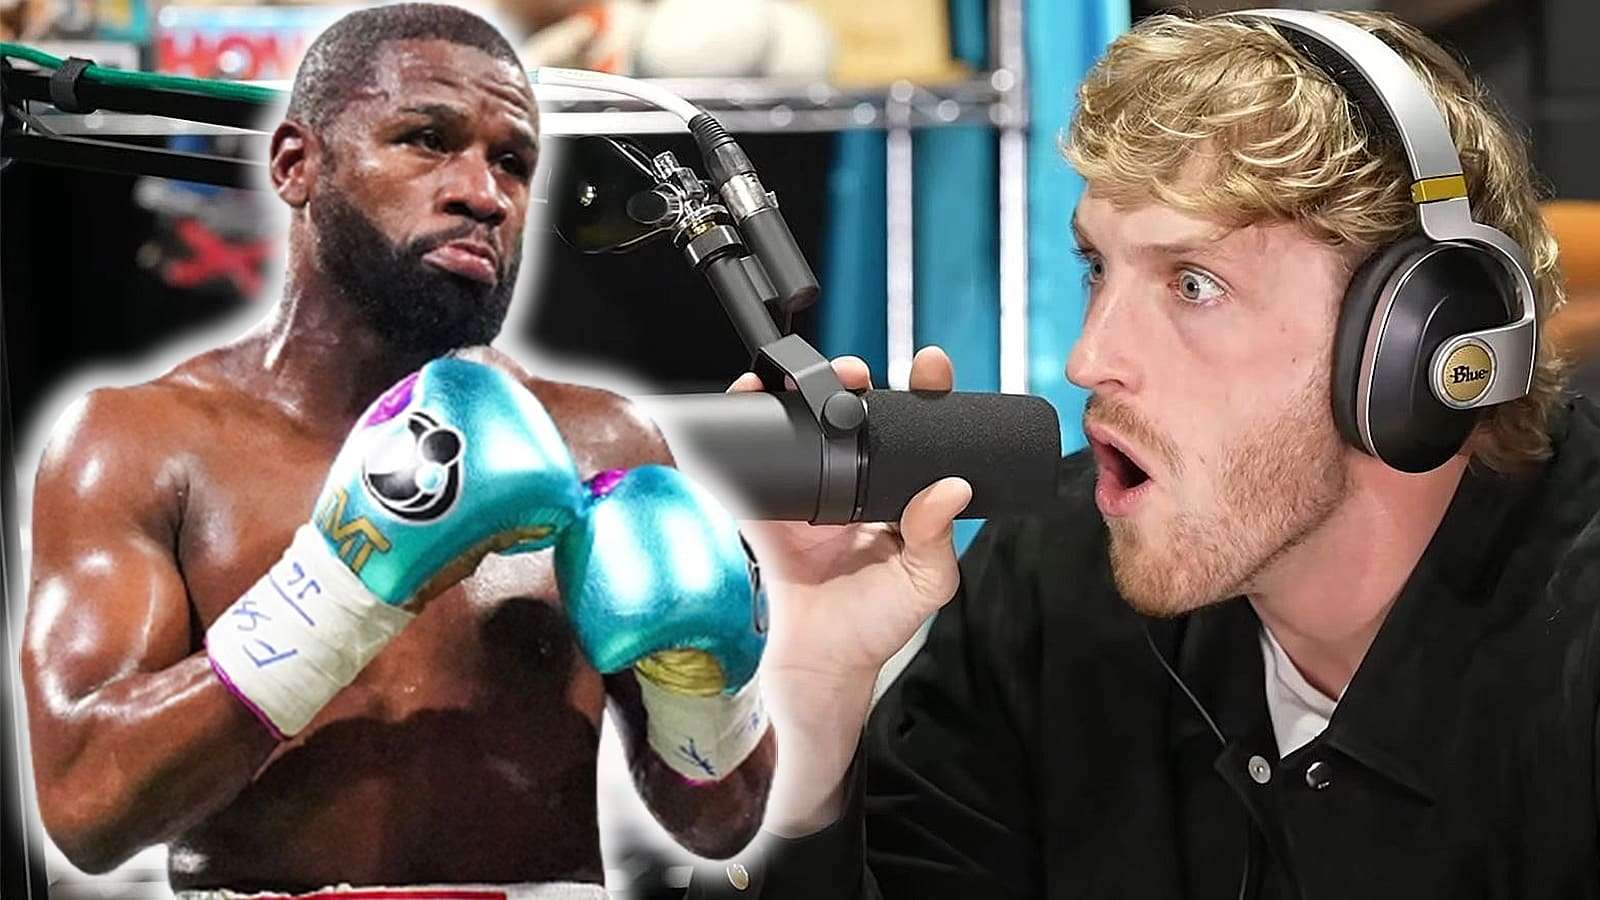 Logan Paul begs Floyd Mayweather to pay him after boxing match